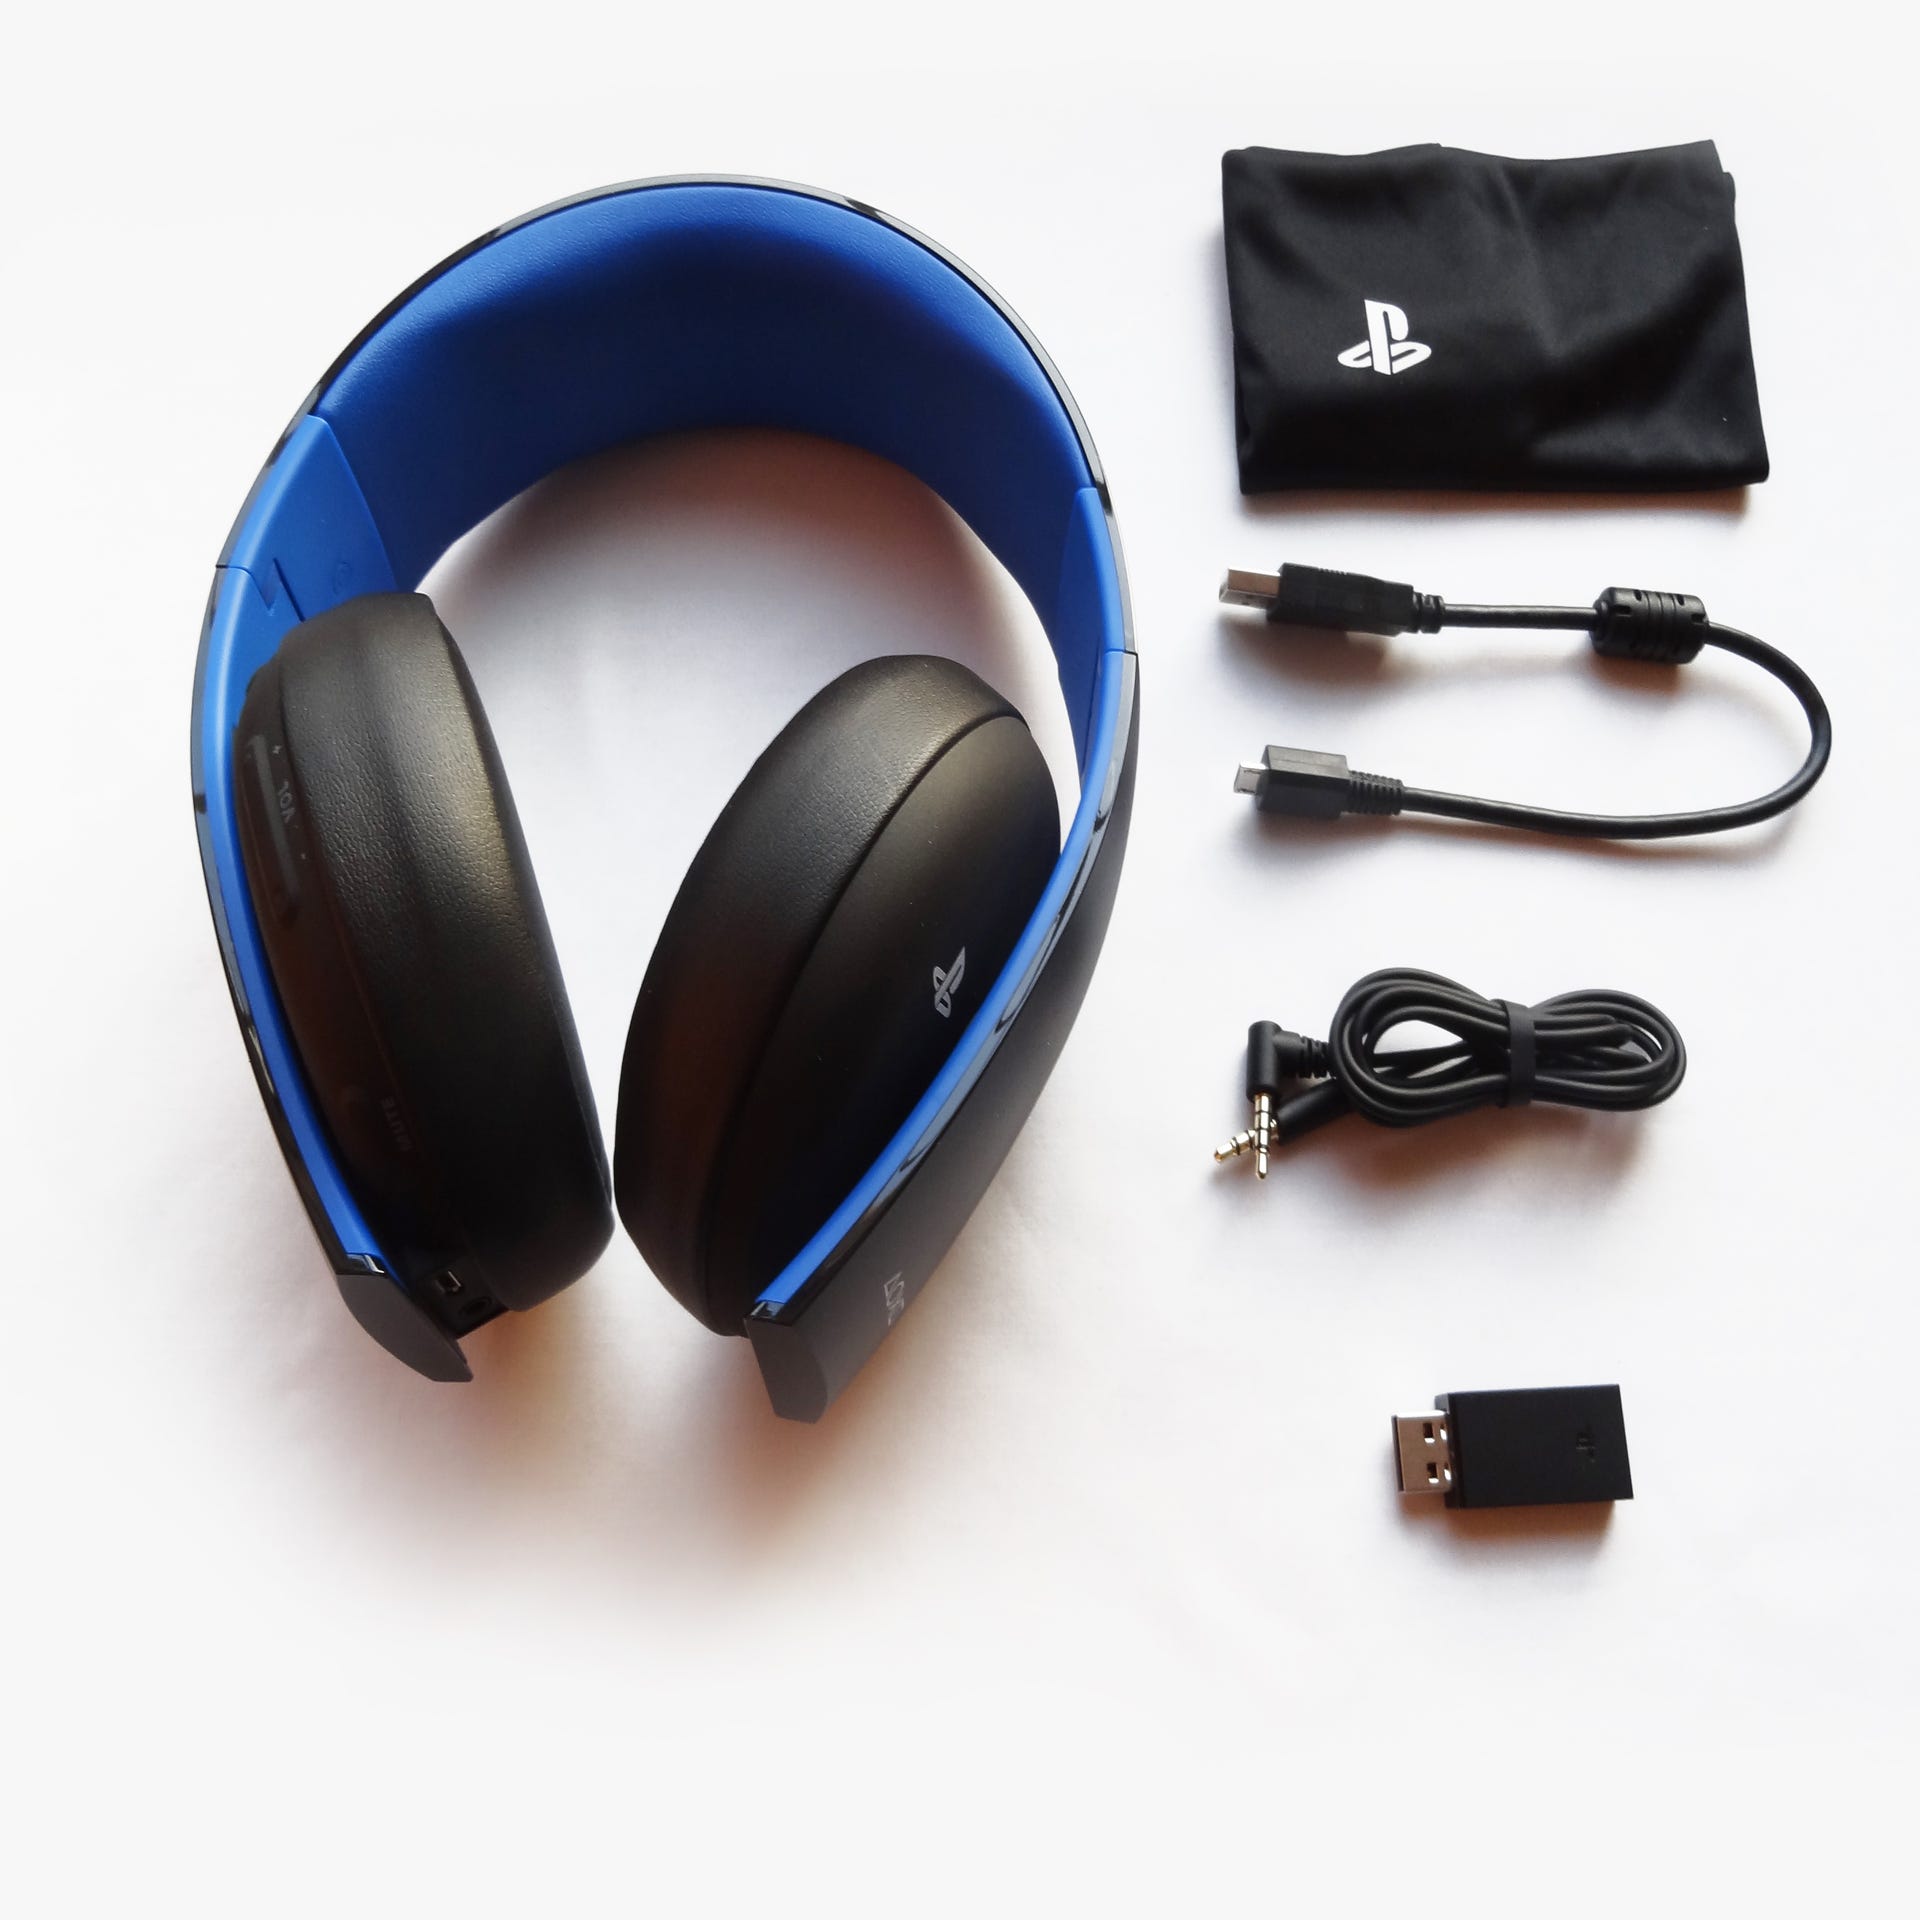 TEST casque PS4 wireless stereo headset 2.0 Fr HD 